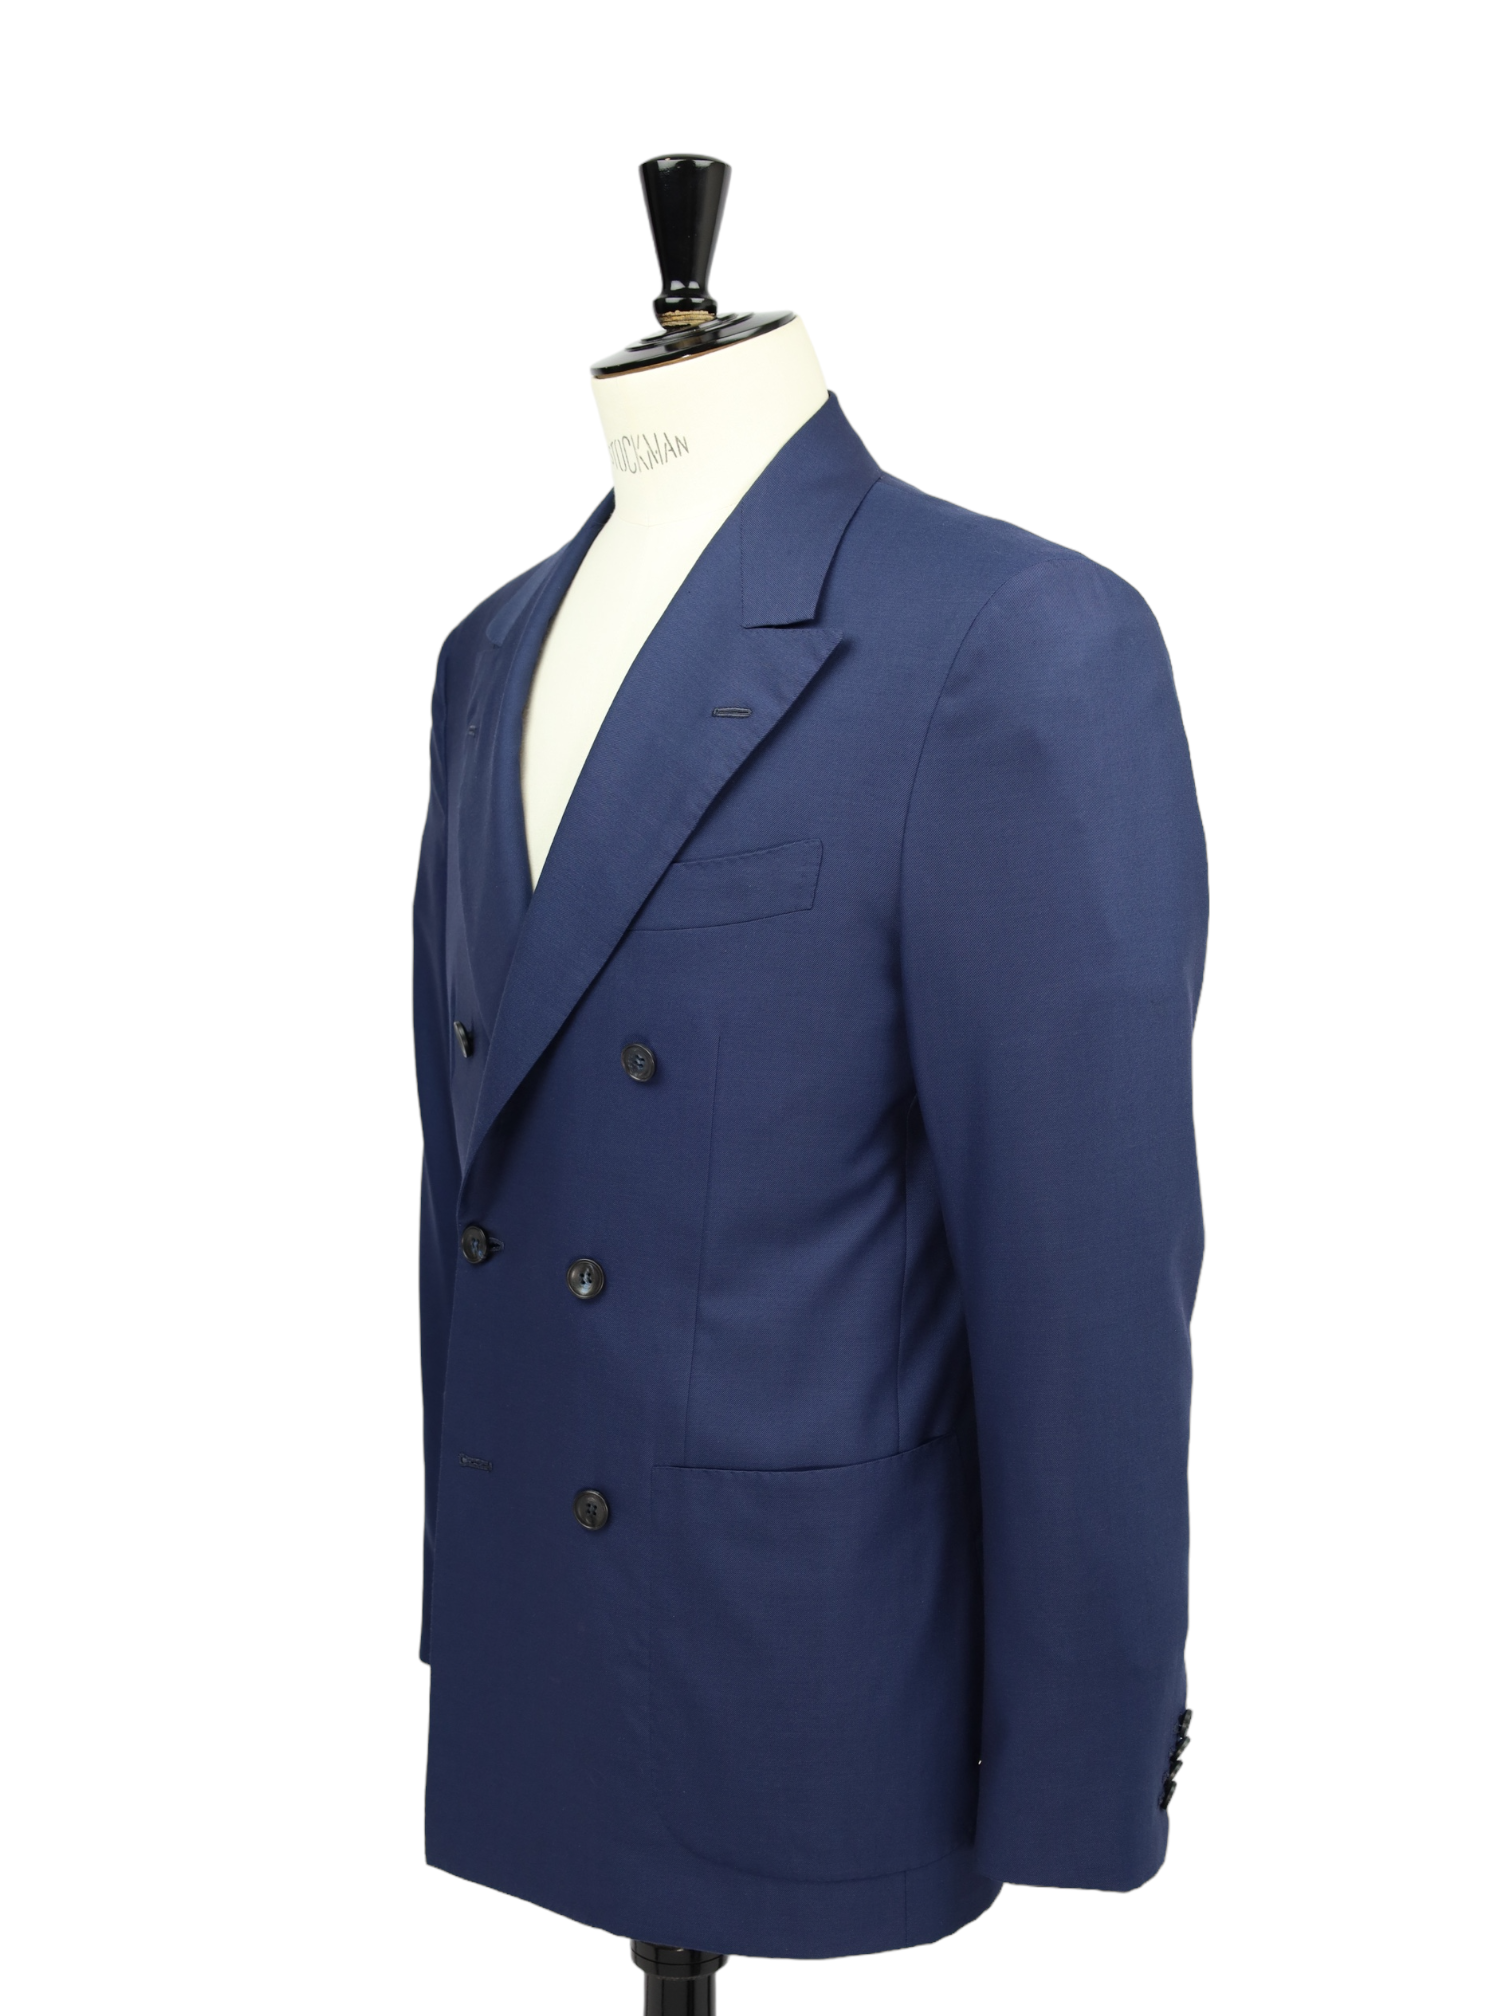 Kiton Blue Double Breasted Neapolitan Suit